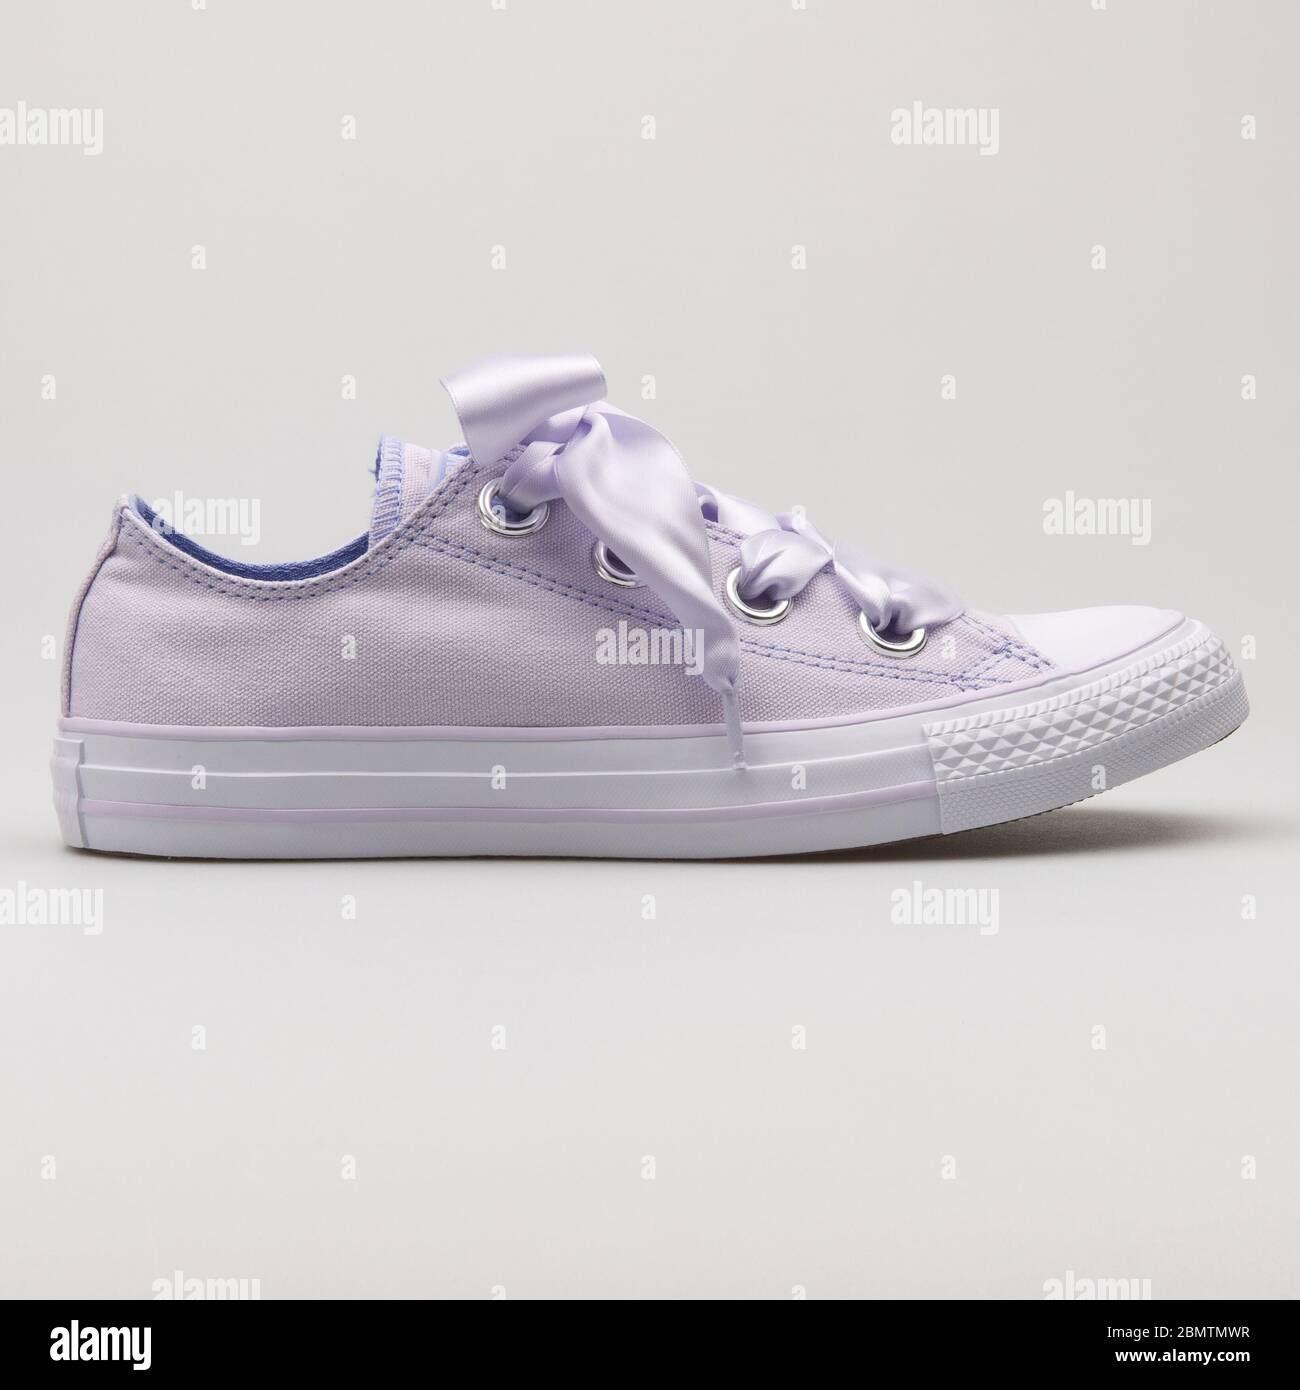 VIENNA, AUSTRIA - FEBRUARY 19, 2018: Converse Chuck Taylor All Star Big  Eyelets OX light purple and white sneaker on white background Stock Photo -  Alamy